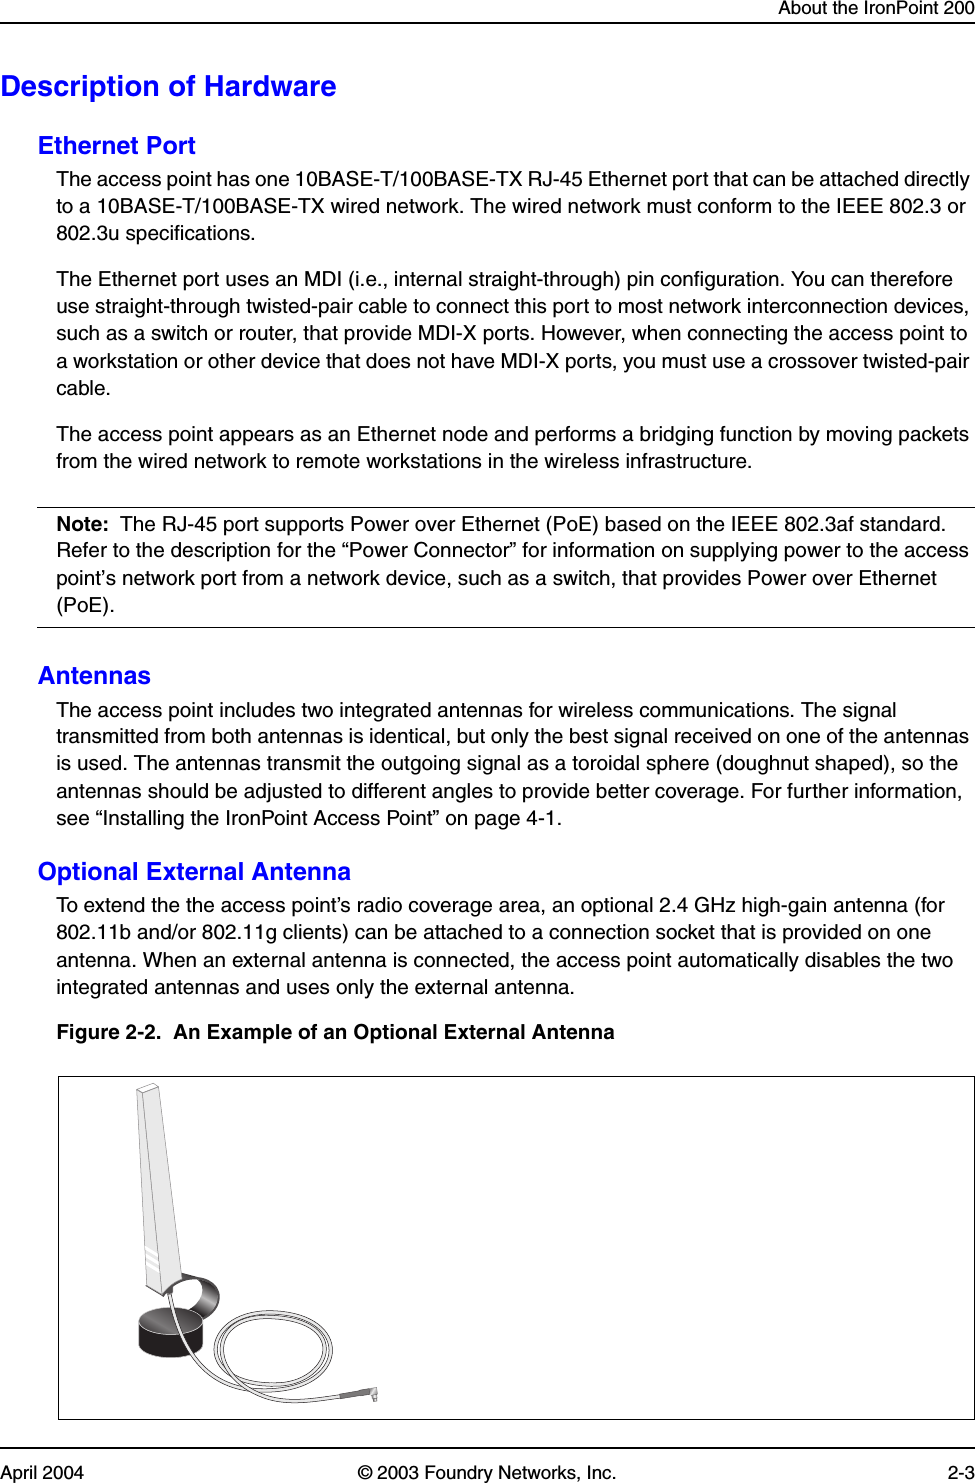 About the IronPoint 200April 2004 © 2003 Foundry Networks, Inc. 2-3Description of HardwareEthernet PortThe access point has one 10BASE-T/100BASE-TX RJ-45 Ethernet port that can be attached directly to a 10BASE-T/100BASE-TX wired network. The wired network must conform to the IEEE 802.3 or 802.3u specifications.The Ethernet port uses an MDI (i.e., internal straight-through) pin configuration. You can therefore use straight-through twisted-pair cable to connect this port to most network interconnection devices, such as a switch or router, that provide MDI-X ports. However, when connecting the access point to a workstation or other device that does not have MDI-X ports, you must use a crossover twisted-pair cable.The access point appears as an Ethernet node and performs a bridging function by moving packets from the wired network to remote workstations in the wireless infrastructure.Note: The RJ-45 port supports Power over Ethernet (PoE) based on the IEEE 802.3af standard. Refer to the description for the “Power Connector” for information on supplying power to the access point’s network port from a network device, such as a switch, that provides Power over Ethernet (PoE).AntennasThe access point includes two integrated antennas for wireless communications. The signal transmitted from both antennas is identical, but only the best signal received on one of the antennas is used. The antennas transmit the outgoing signal as a toroidal sphere (doughnut shaped), so the antennas should be adjusted to different angles to provide better coverage. For further information, see “Installing the IronPoint Access Point” on page 4-1.Optional External AntennaTo extend the the access point’s radio coverage area, an optional 2.4 GHz high-gain antenna (for 802.11b and/or 802.11g clients) can be attached to a connection socket that is provided on one antenna. When an external antenna is connected, the access point automatically disables the two integrated antennas and uses only the external antenna.Figure 2-2.  An Example of an Optional External Antenna